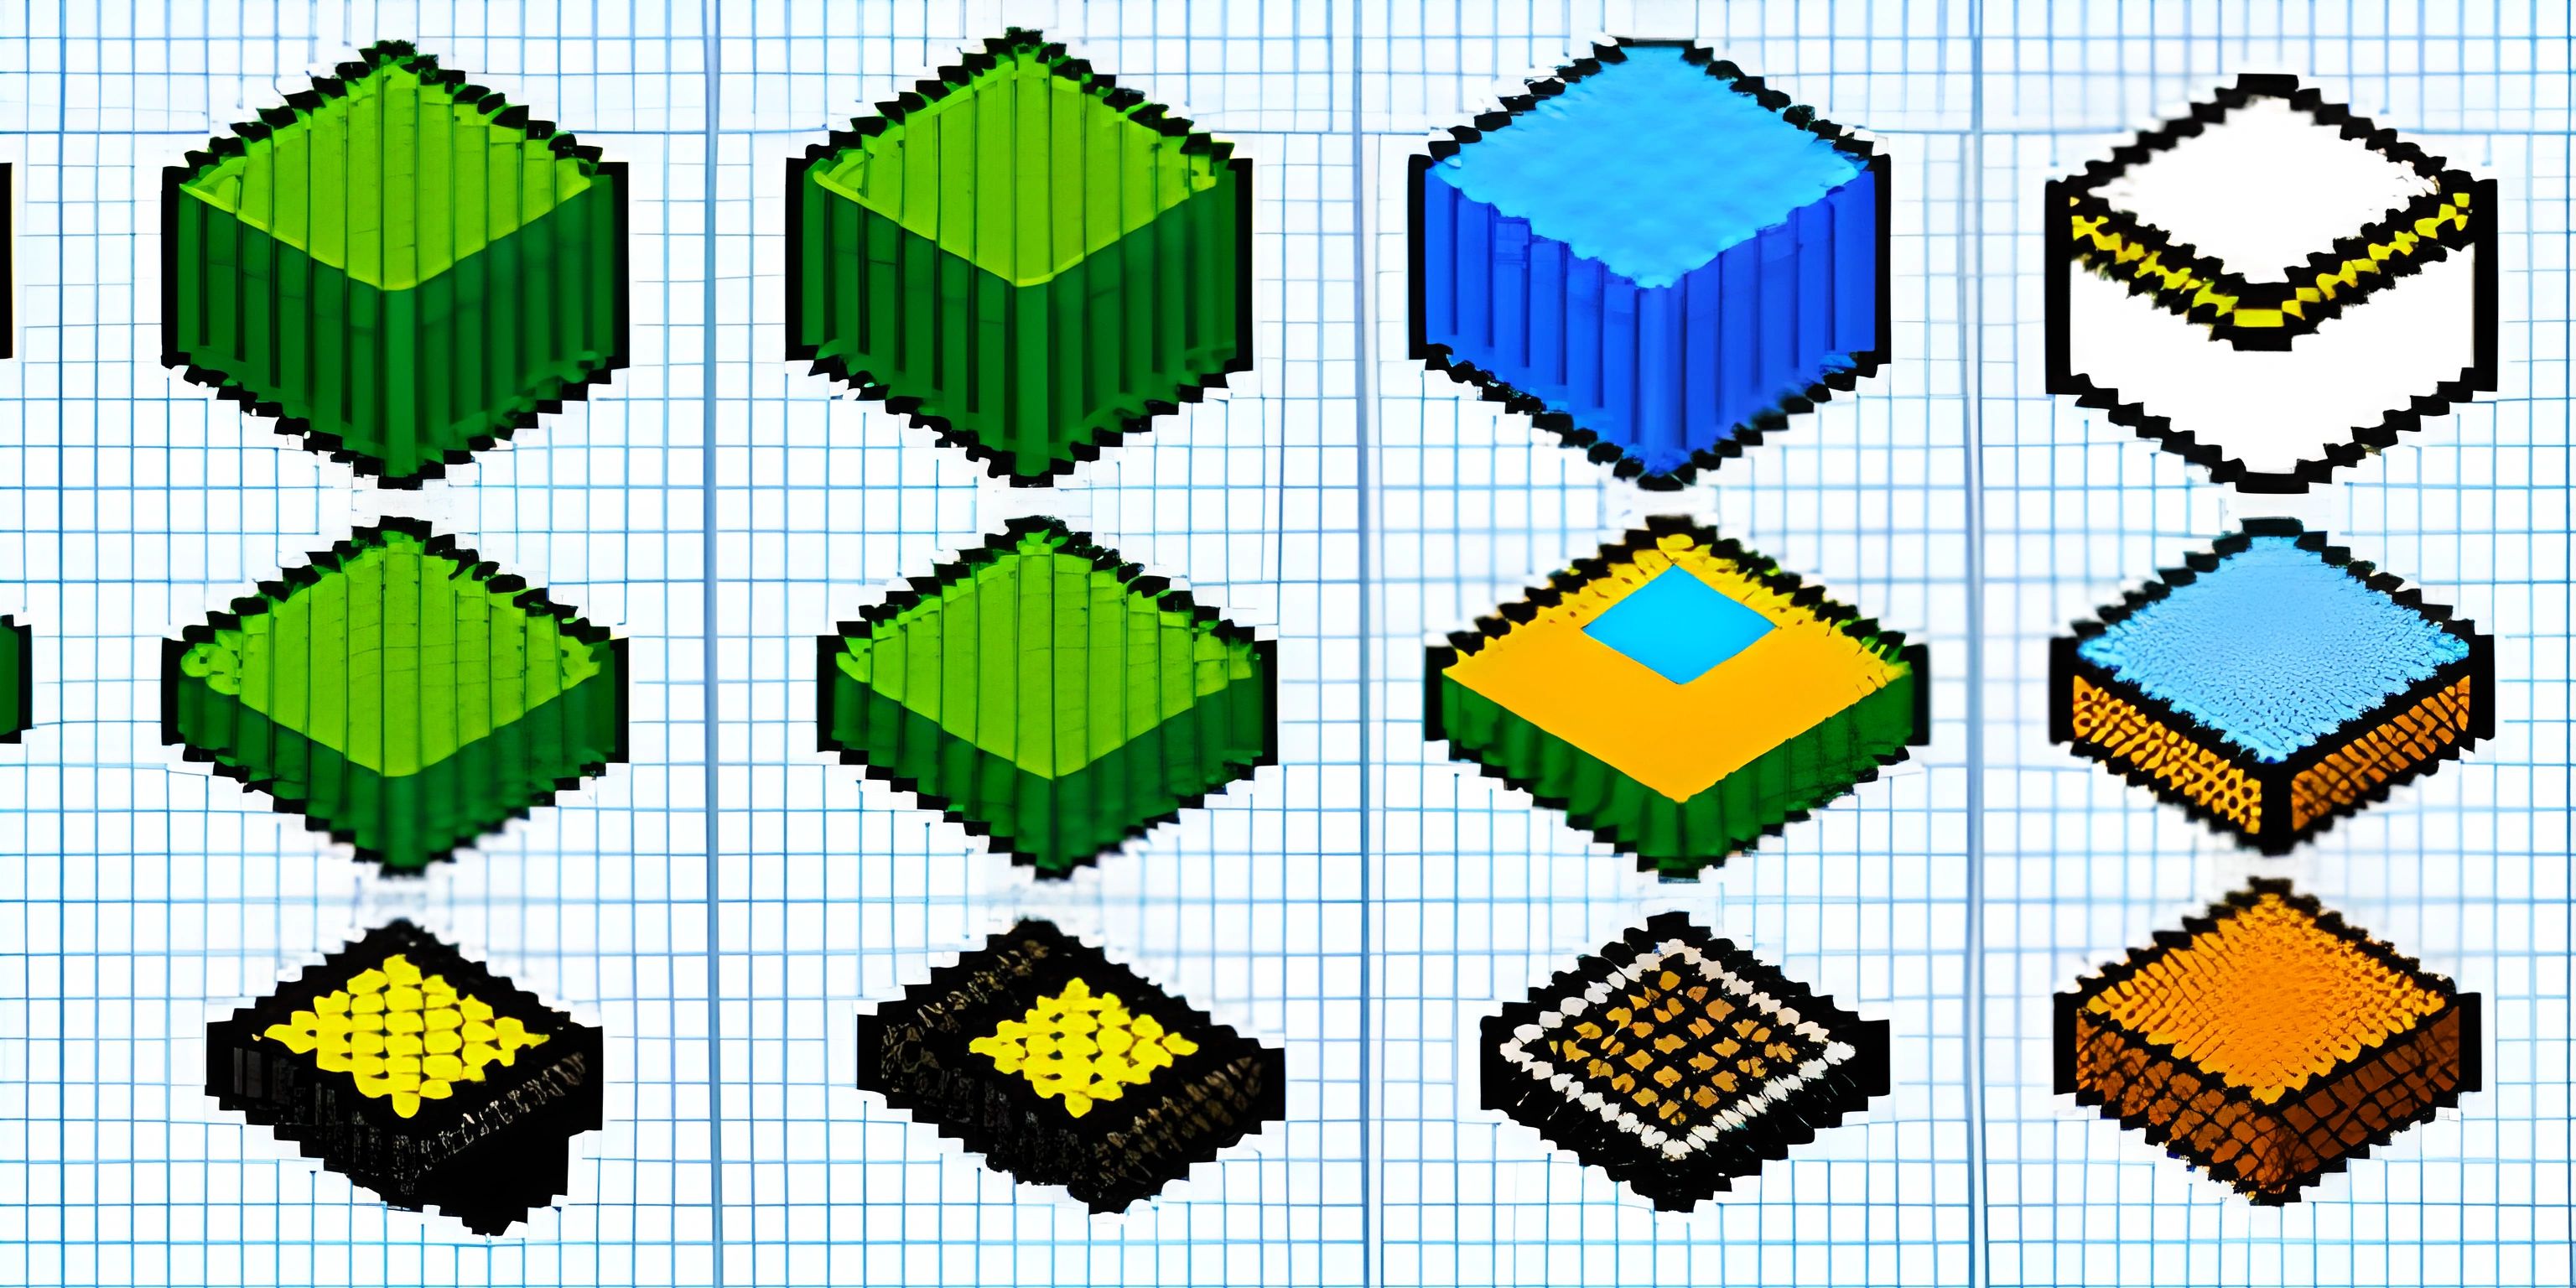 there are nine different colored cubes that appear to be pixelized on paper, each with a smaller shape